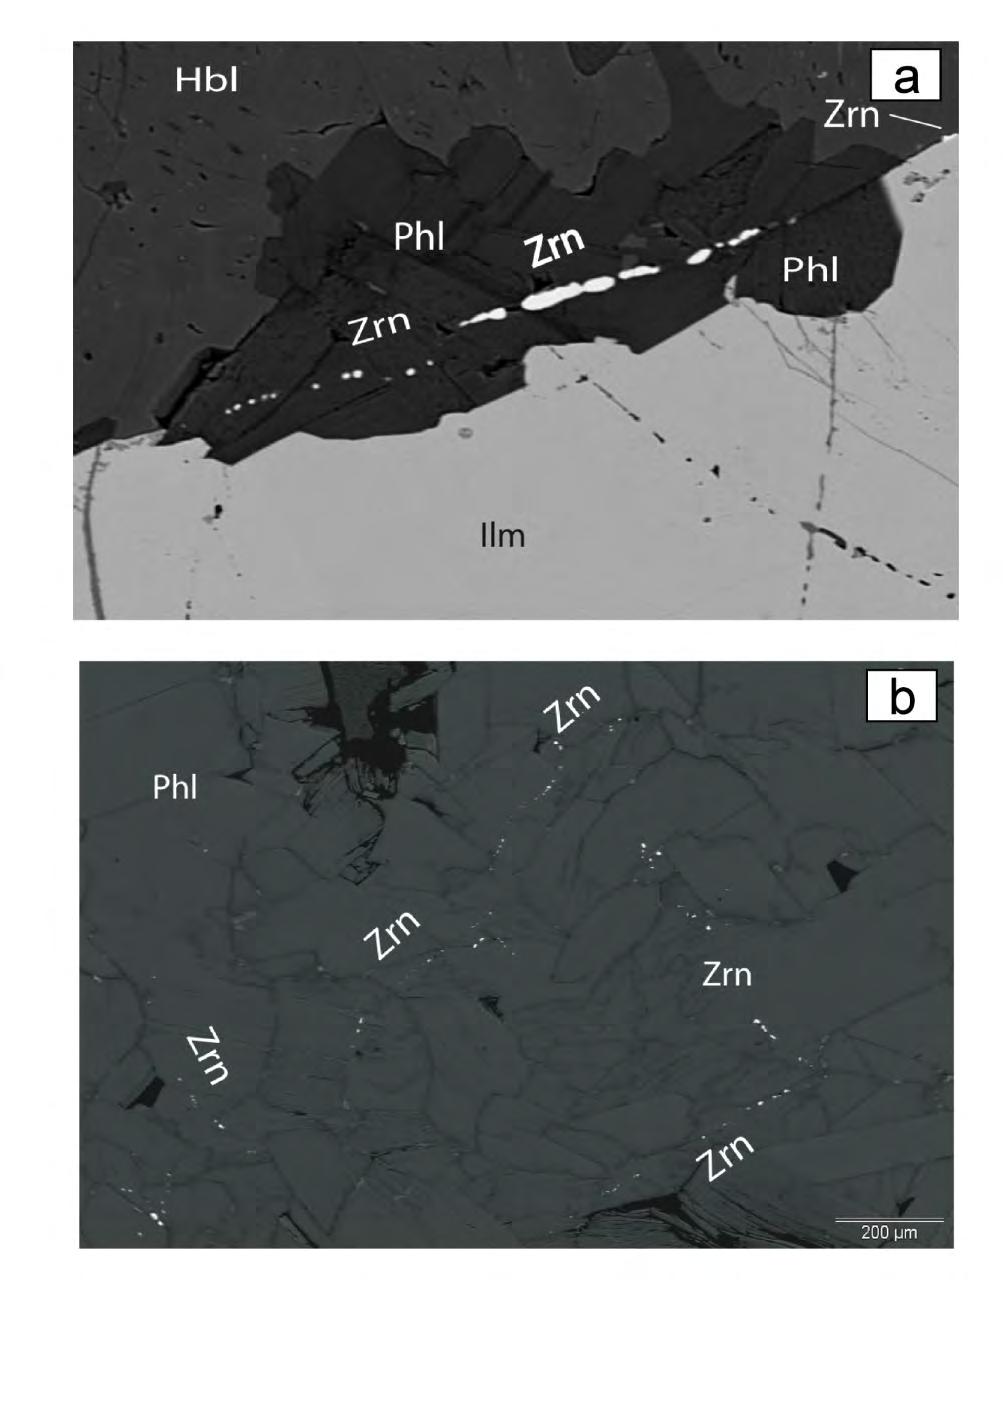 The problem of identifying metasomatism when there is no chemical or physical reference frame. Small zircon crystals are often associated with ilmenite grain boundaries in a wide range of rock types.